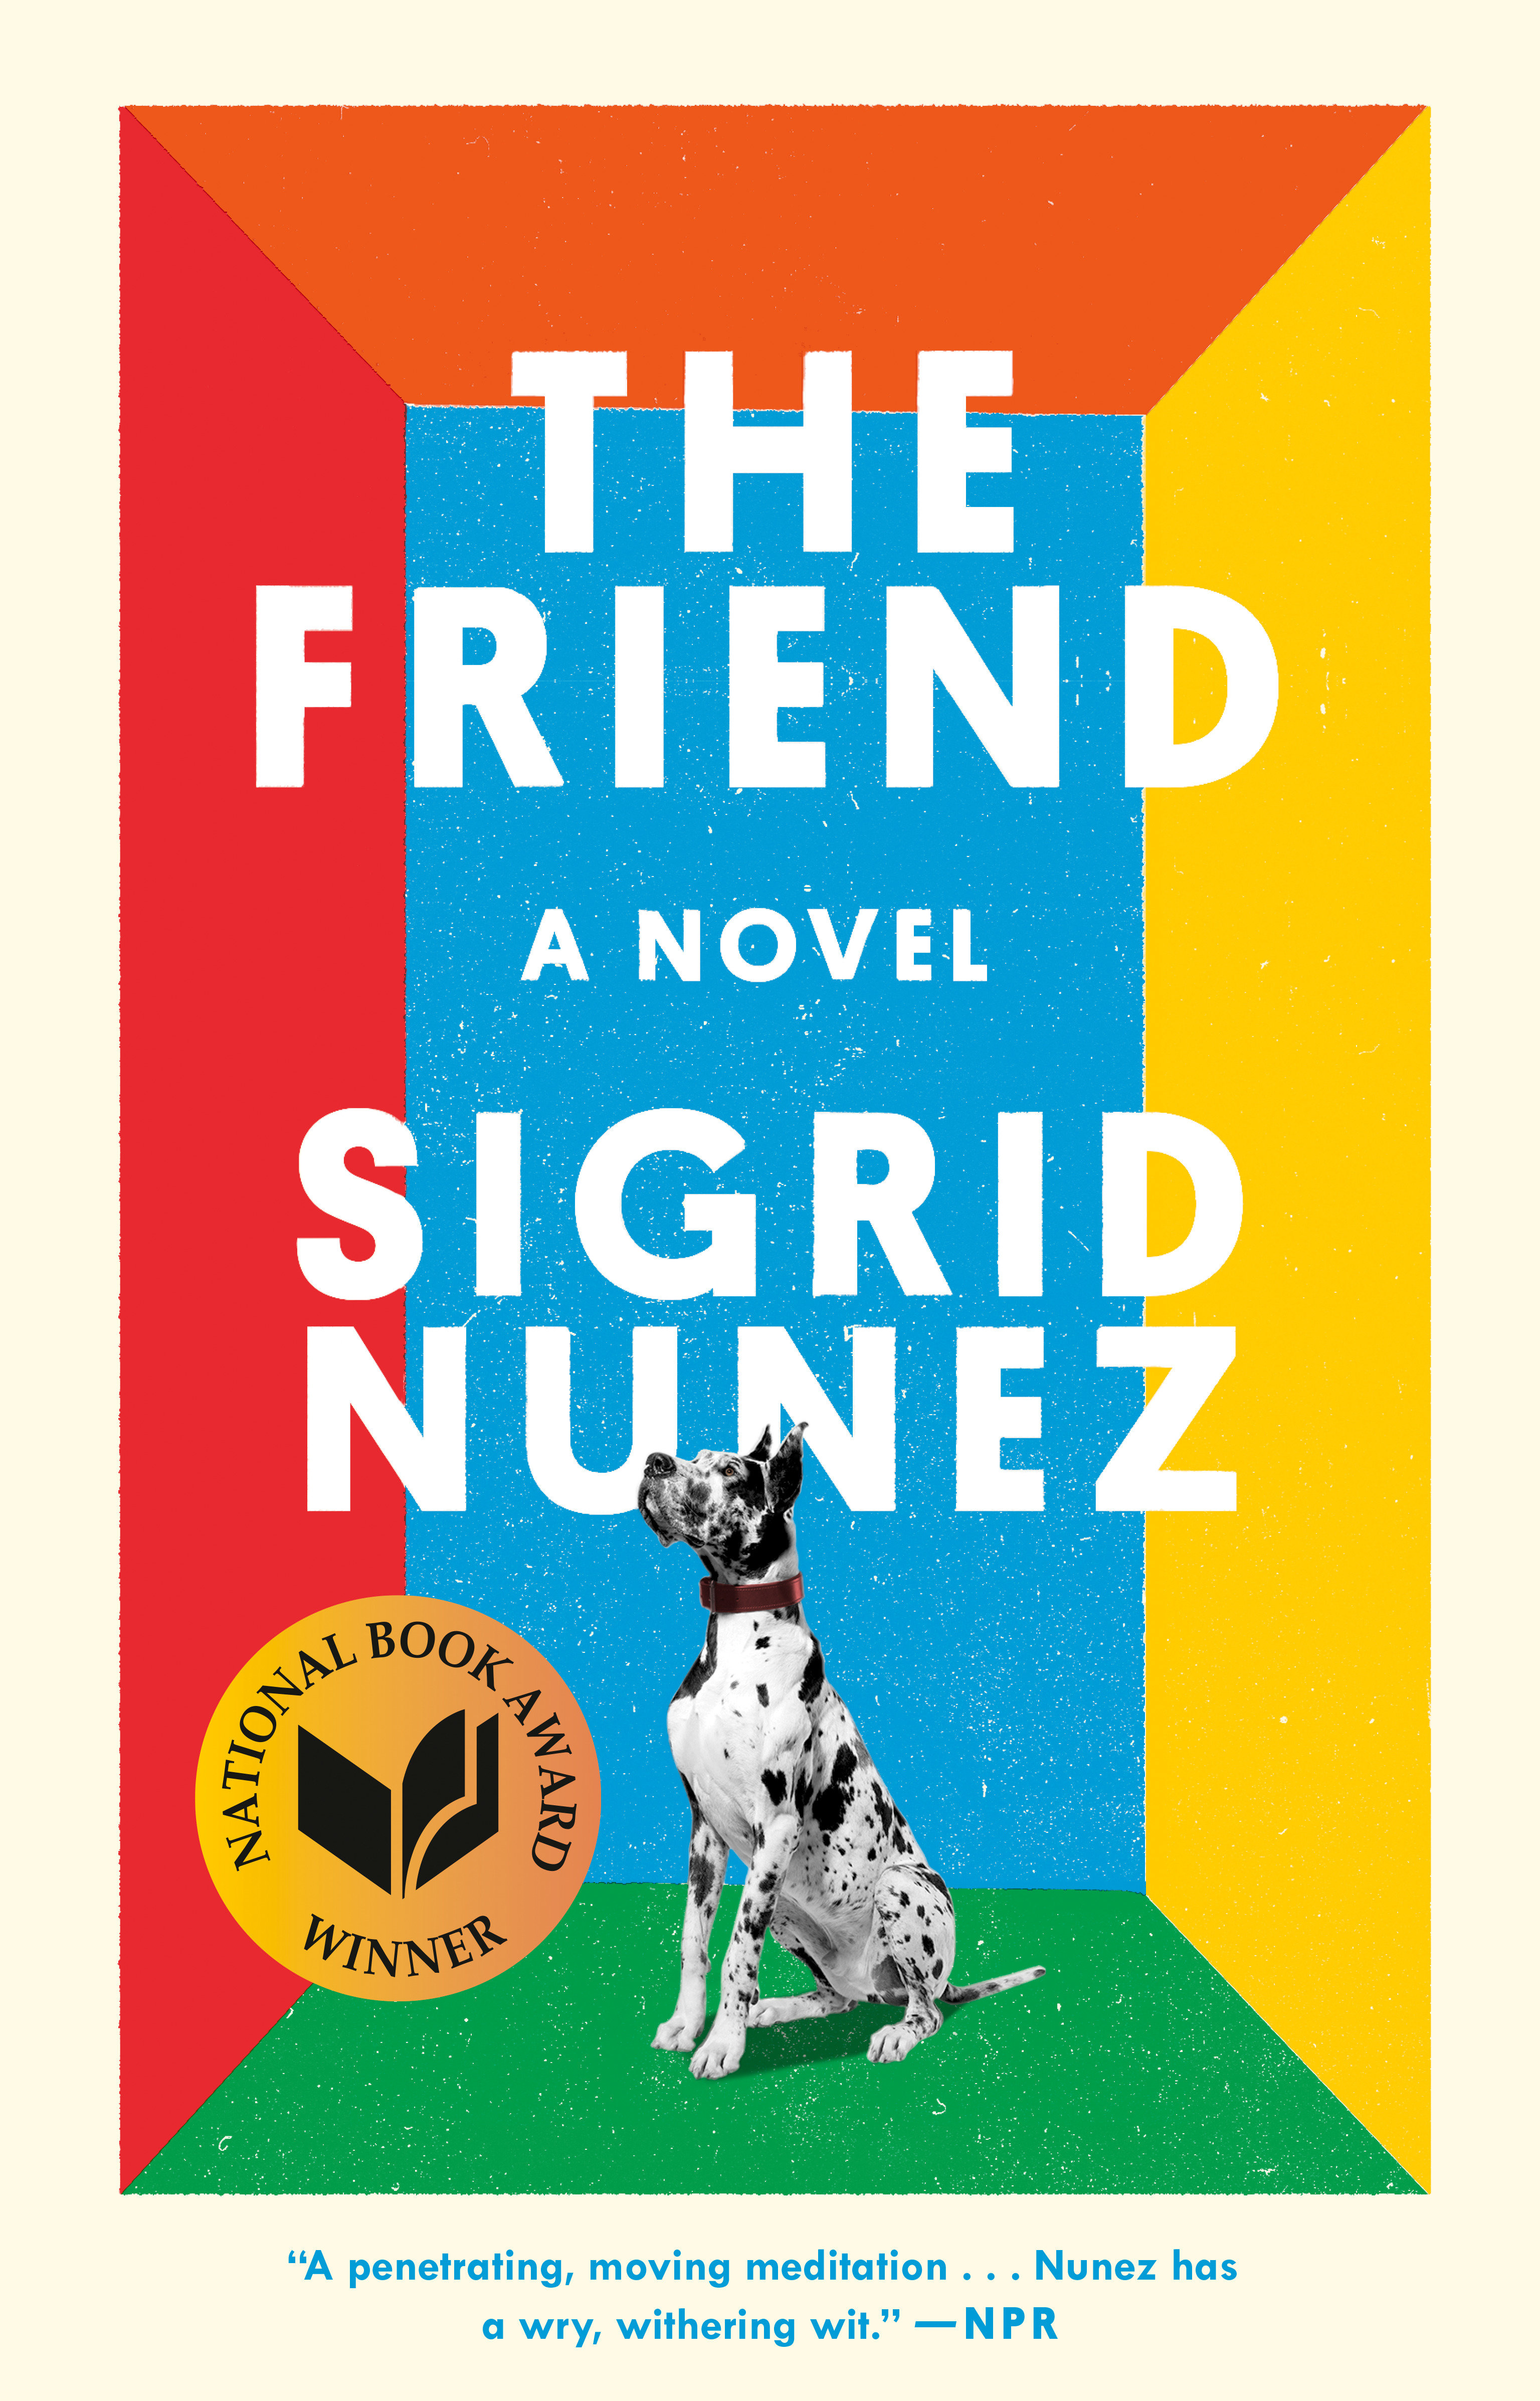 Link to The Friend by Sigrid Nunez in the catalog